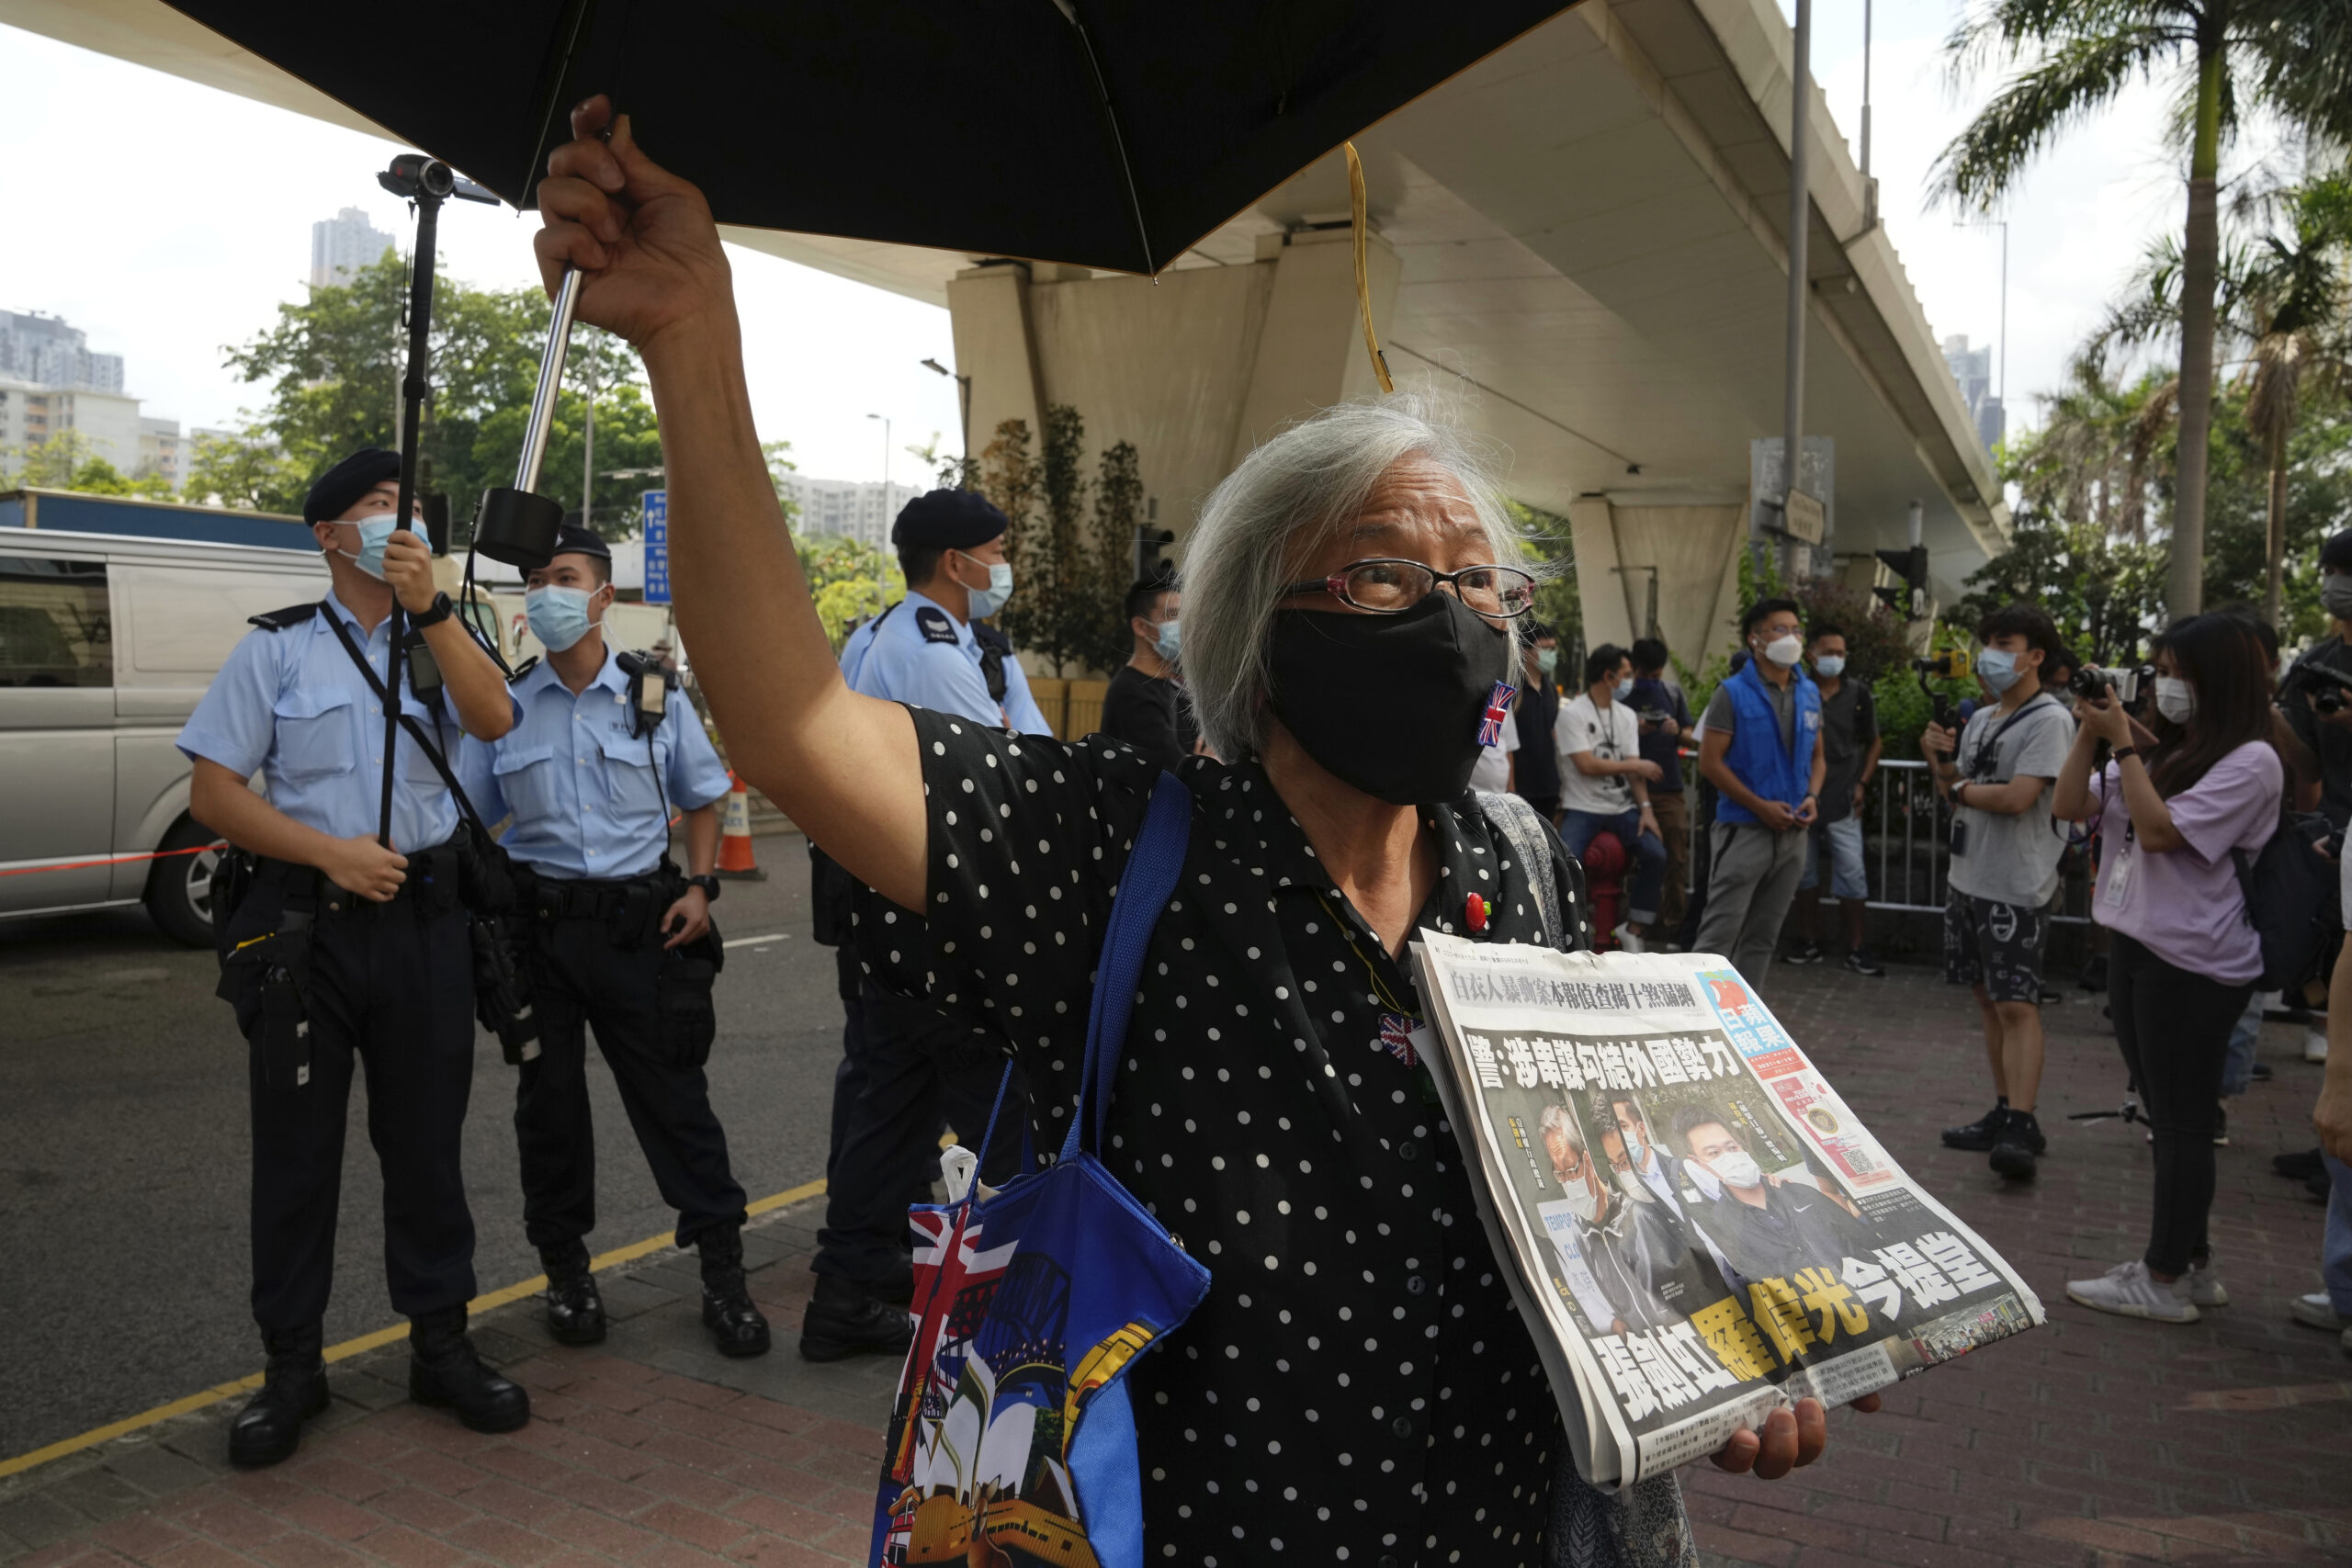 A pro-democracy activist holding a copy of Apple Daily newspaper protests outside a court in Hong Kong, Saturday, June 19, 2021, to demand to release political prisoners. The top editor of the Hong Kong's pro-democracy newspaper and the head of its parent company were brought to a courthouse Saturday for their first hearing since their arrest under the city's national security law.(AP Photo/Kin Cheung)